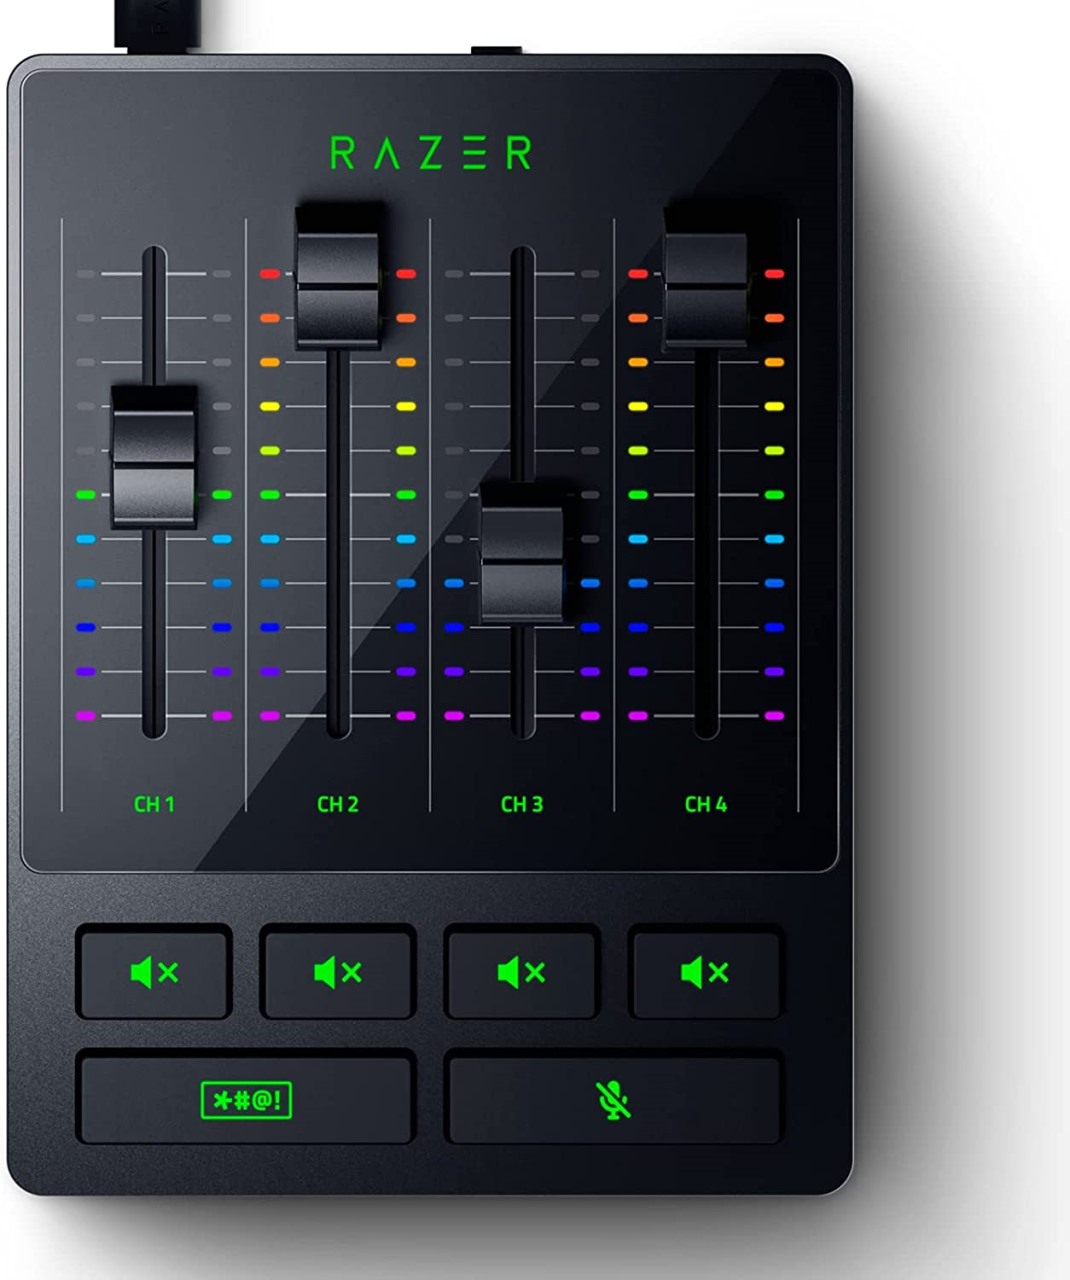 Razer Audio Mixer: All-in-One Streaming/Broadcasting Mixer